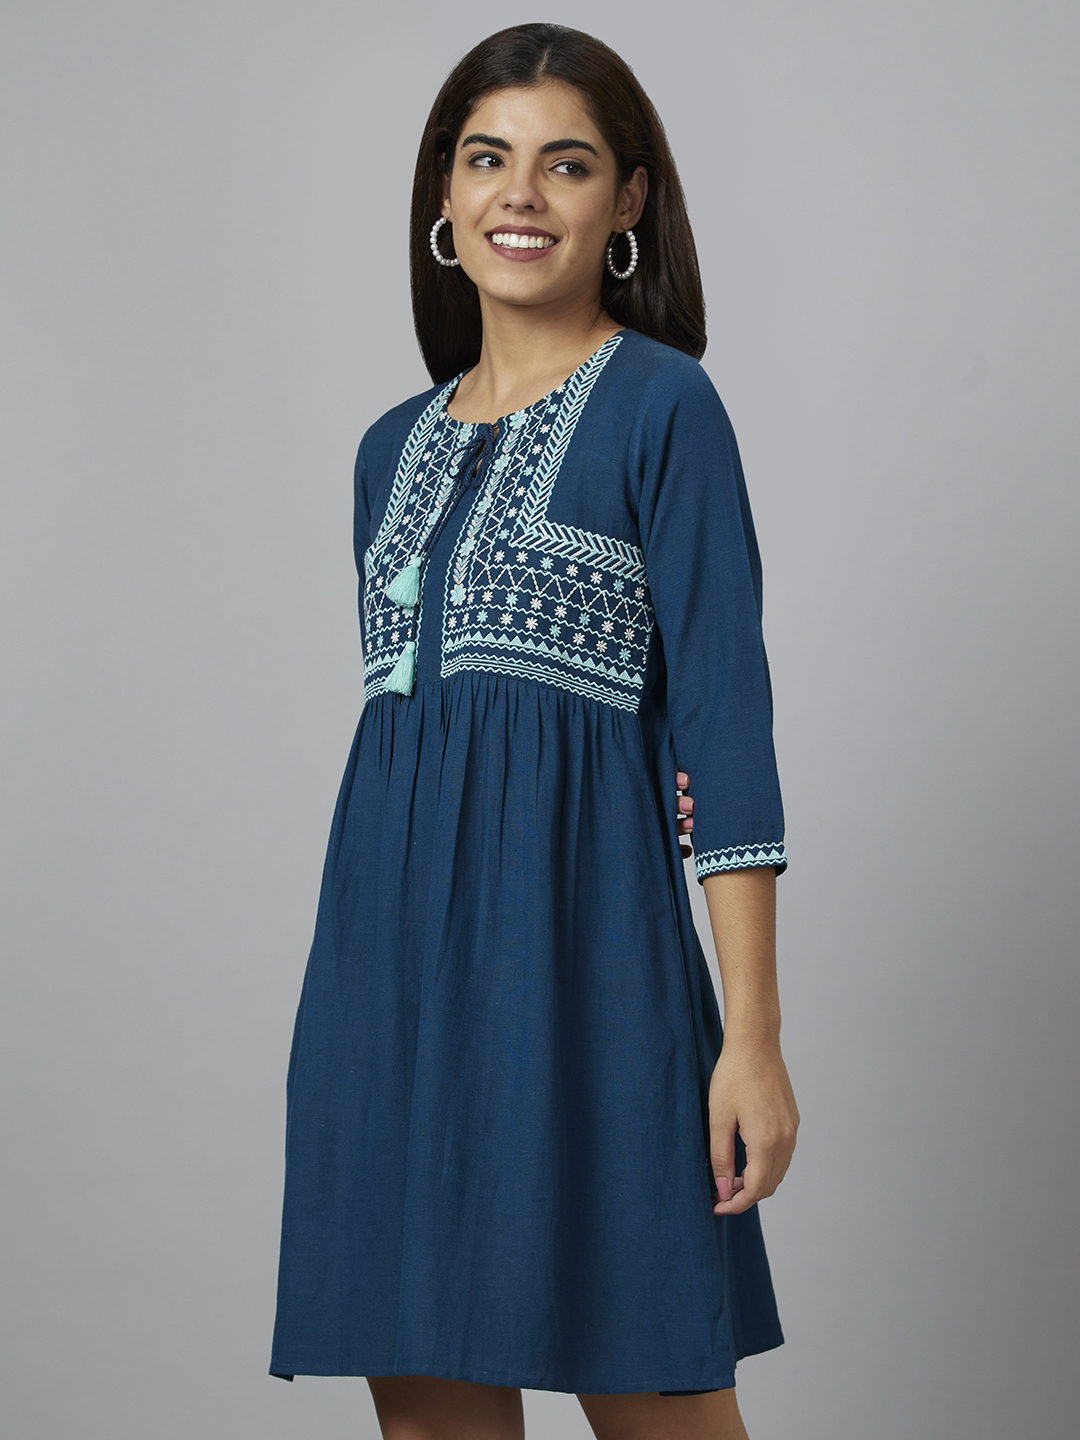 Globus Women Teal Embroidered A-Line Dress